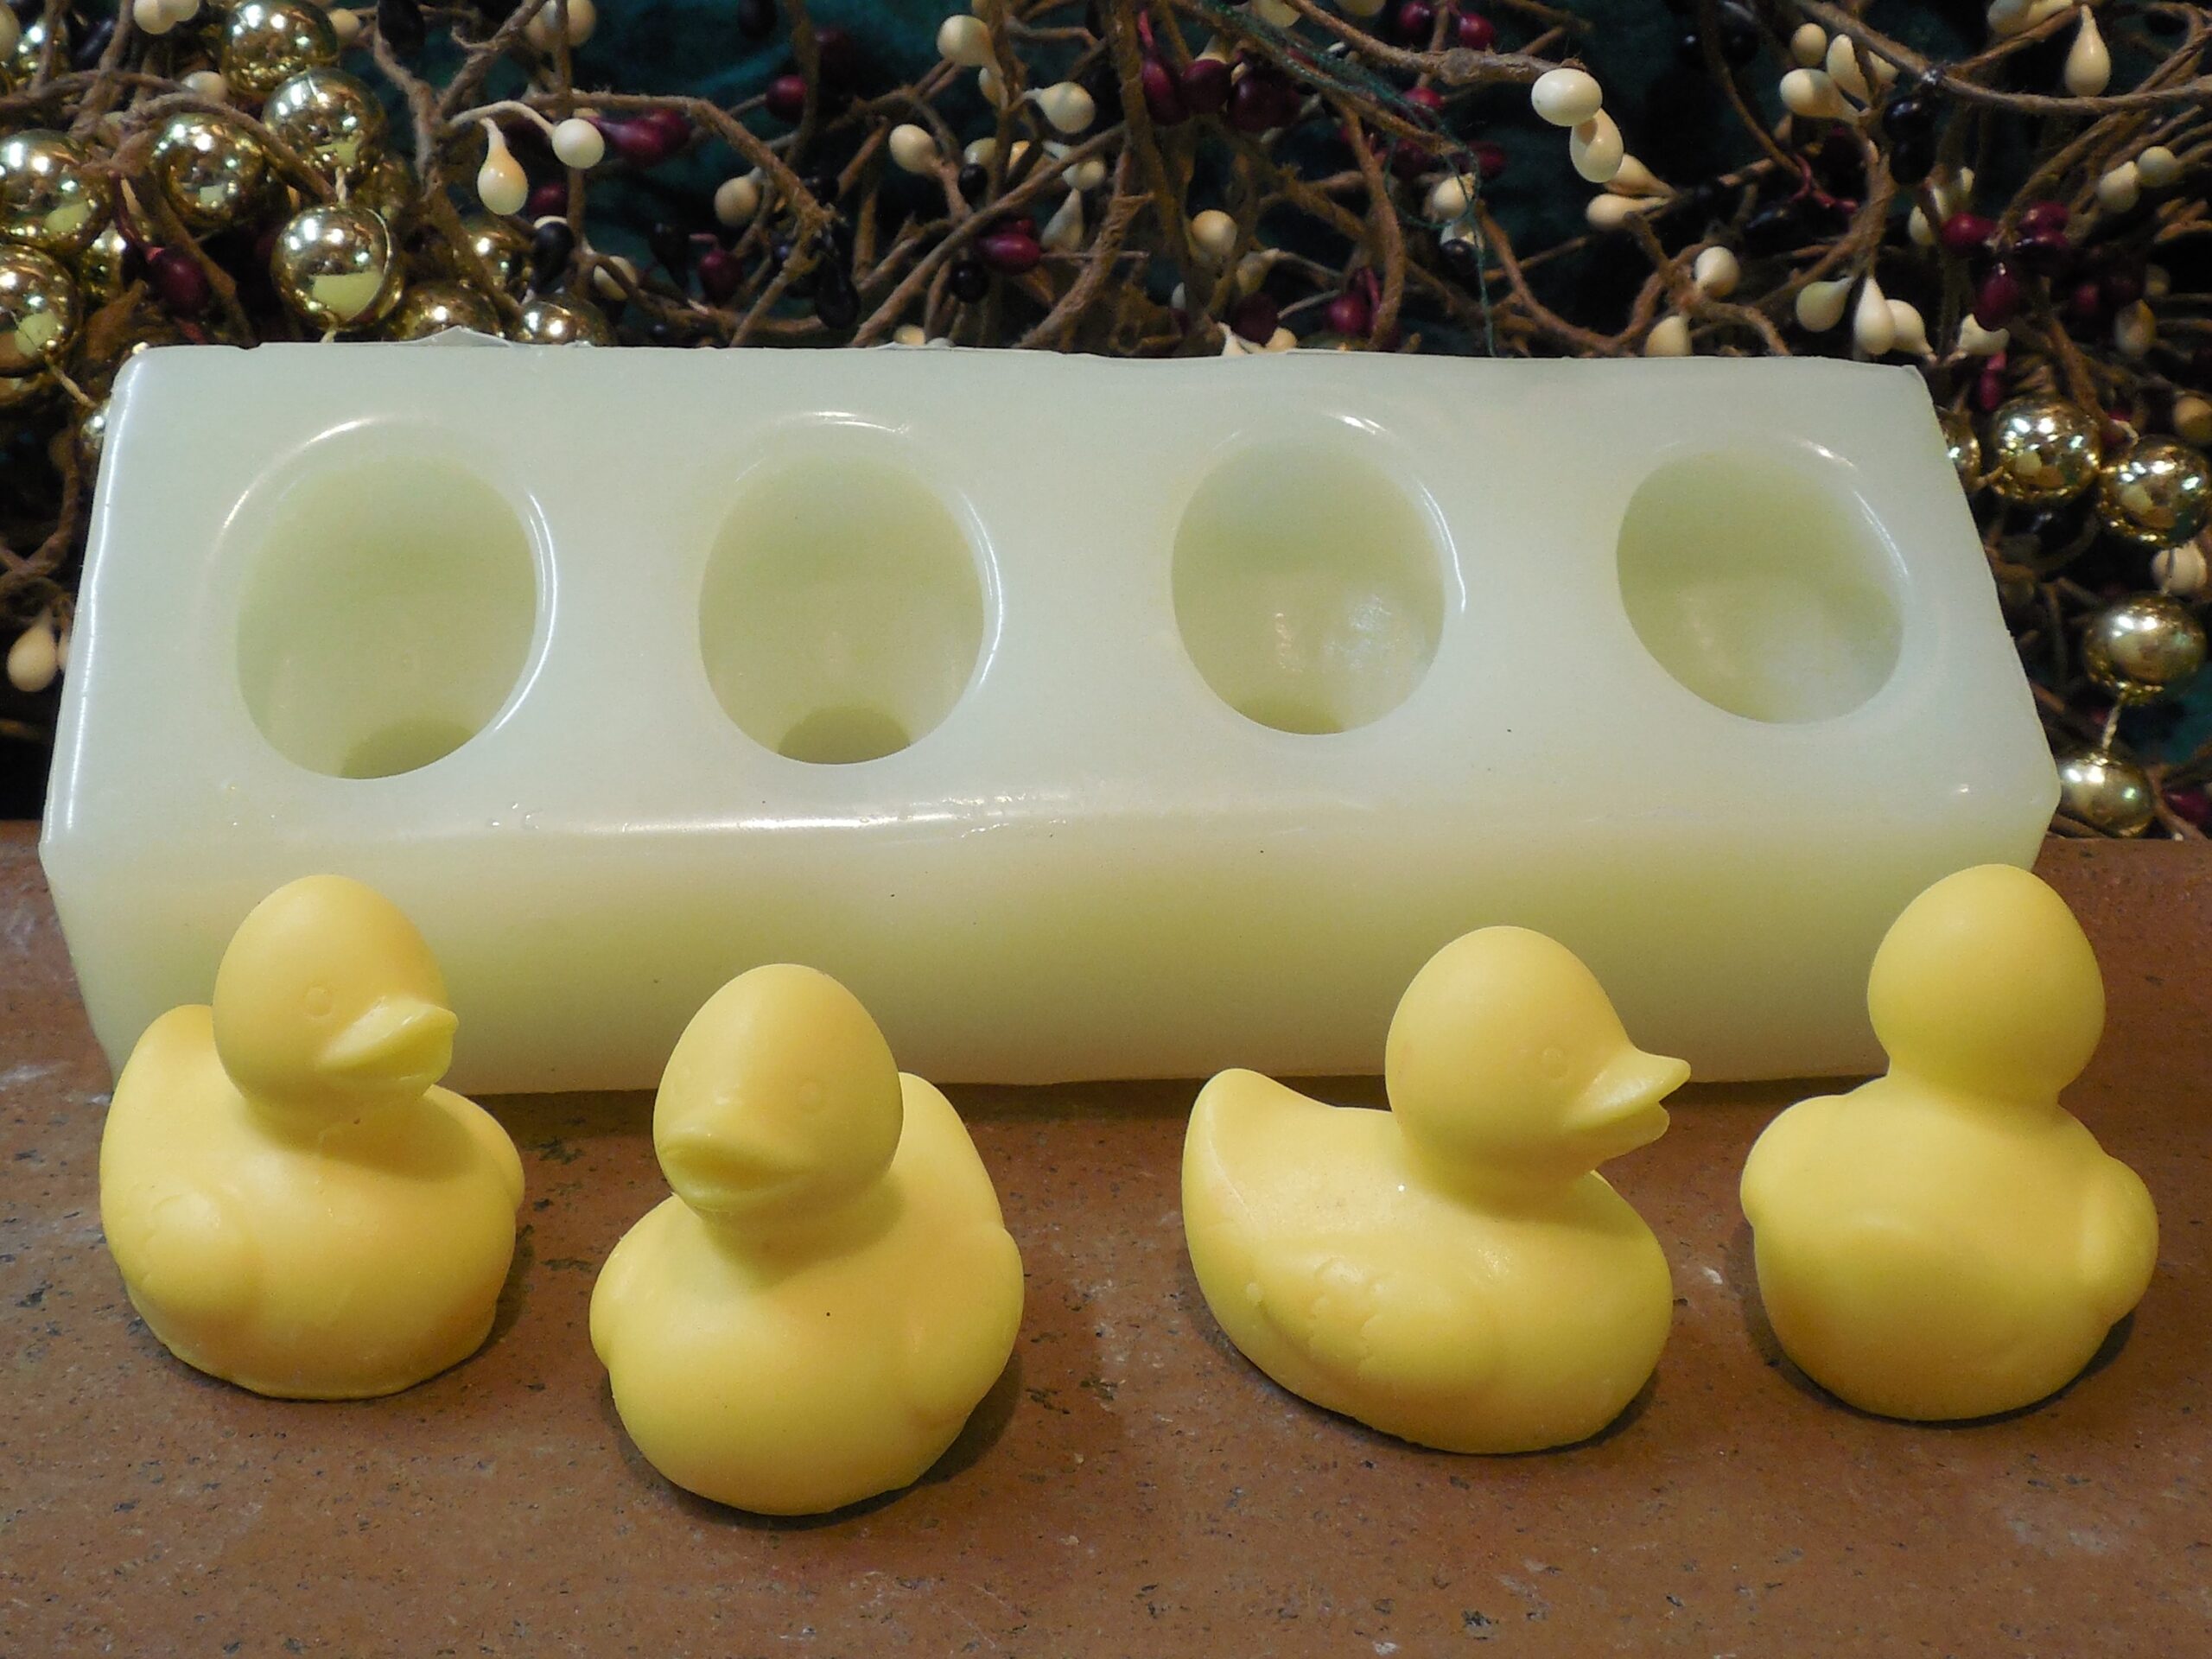 https://www.vanyulay.com/wp-content/uploads/2017/05/Rubber-Duckie-Mold-5344-3-scaled.jpg